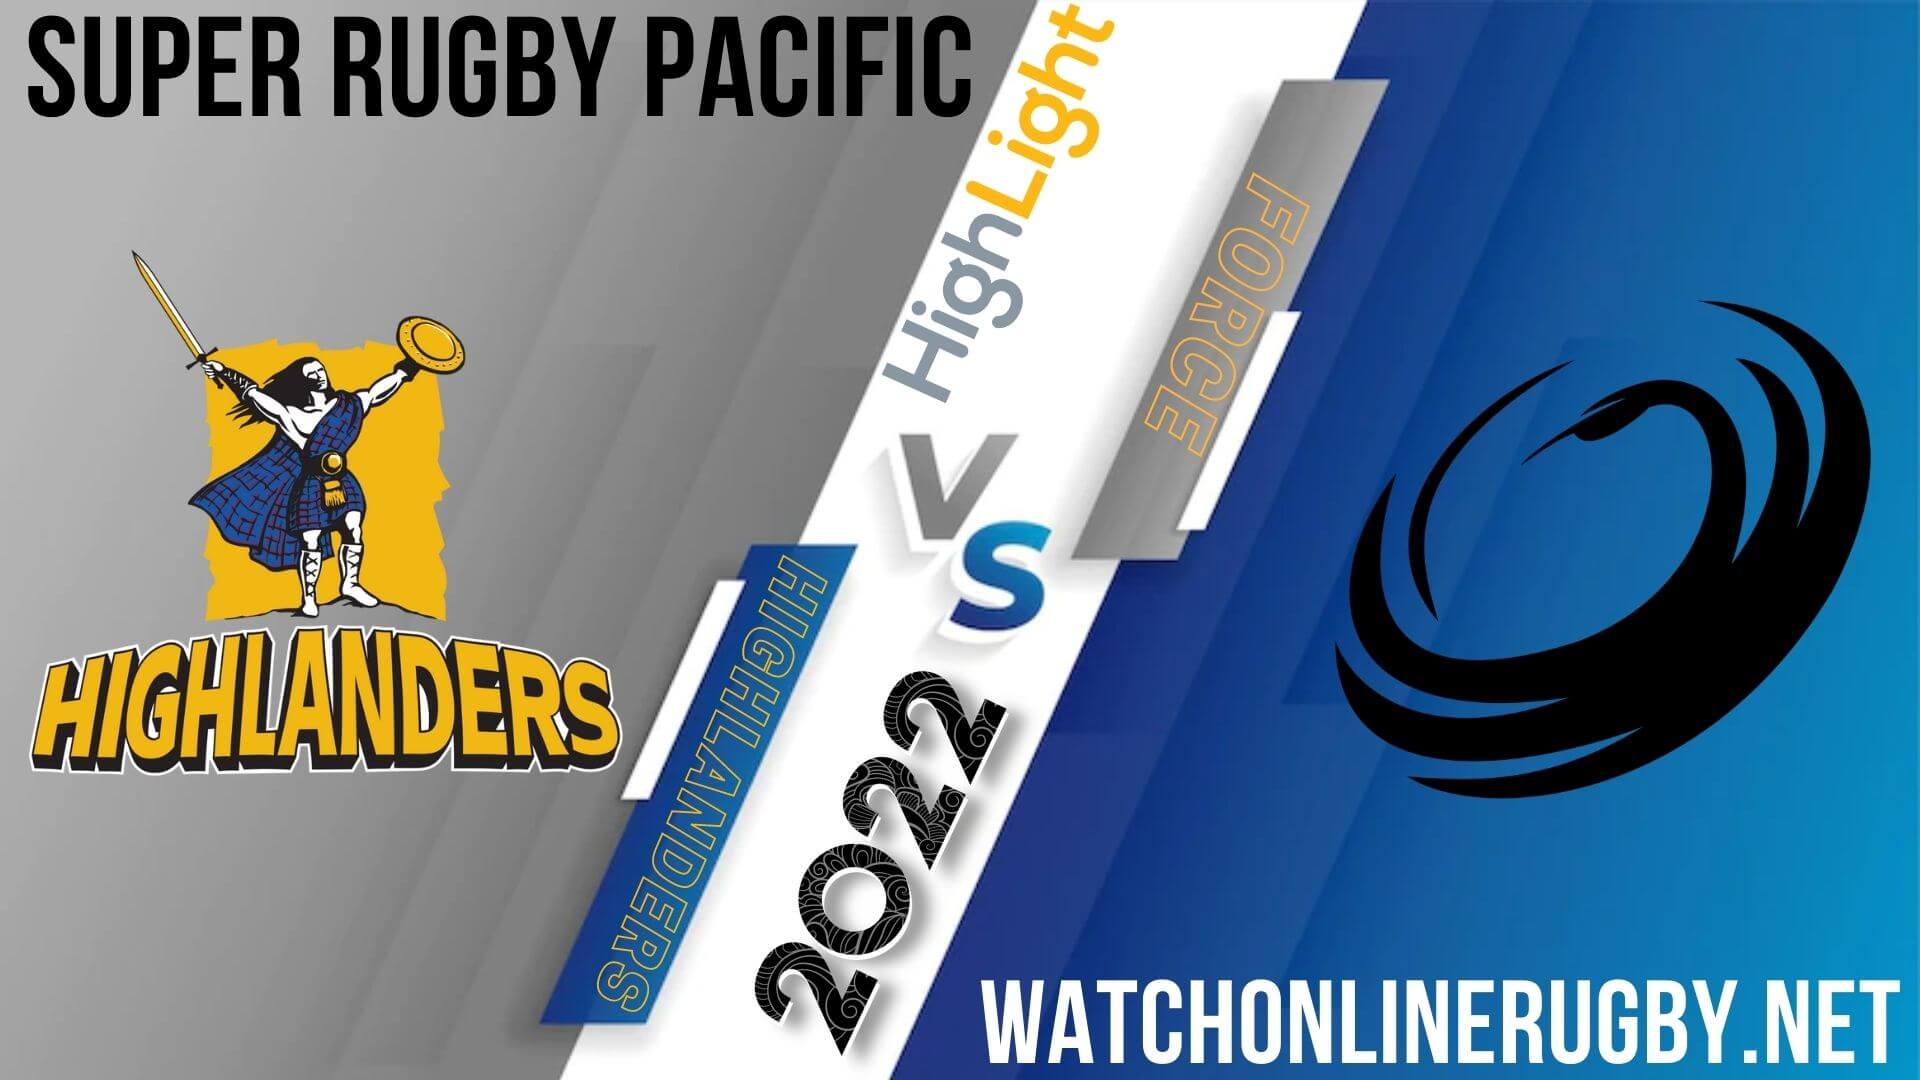 Highlanders Vs Western Force Super Rugby Pacific 2022 RD 13